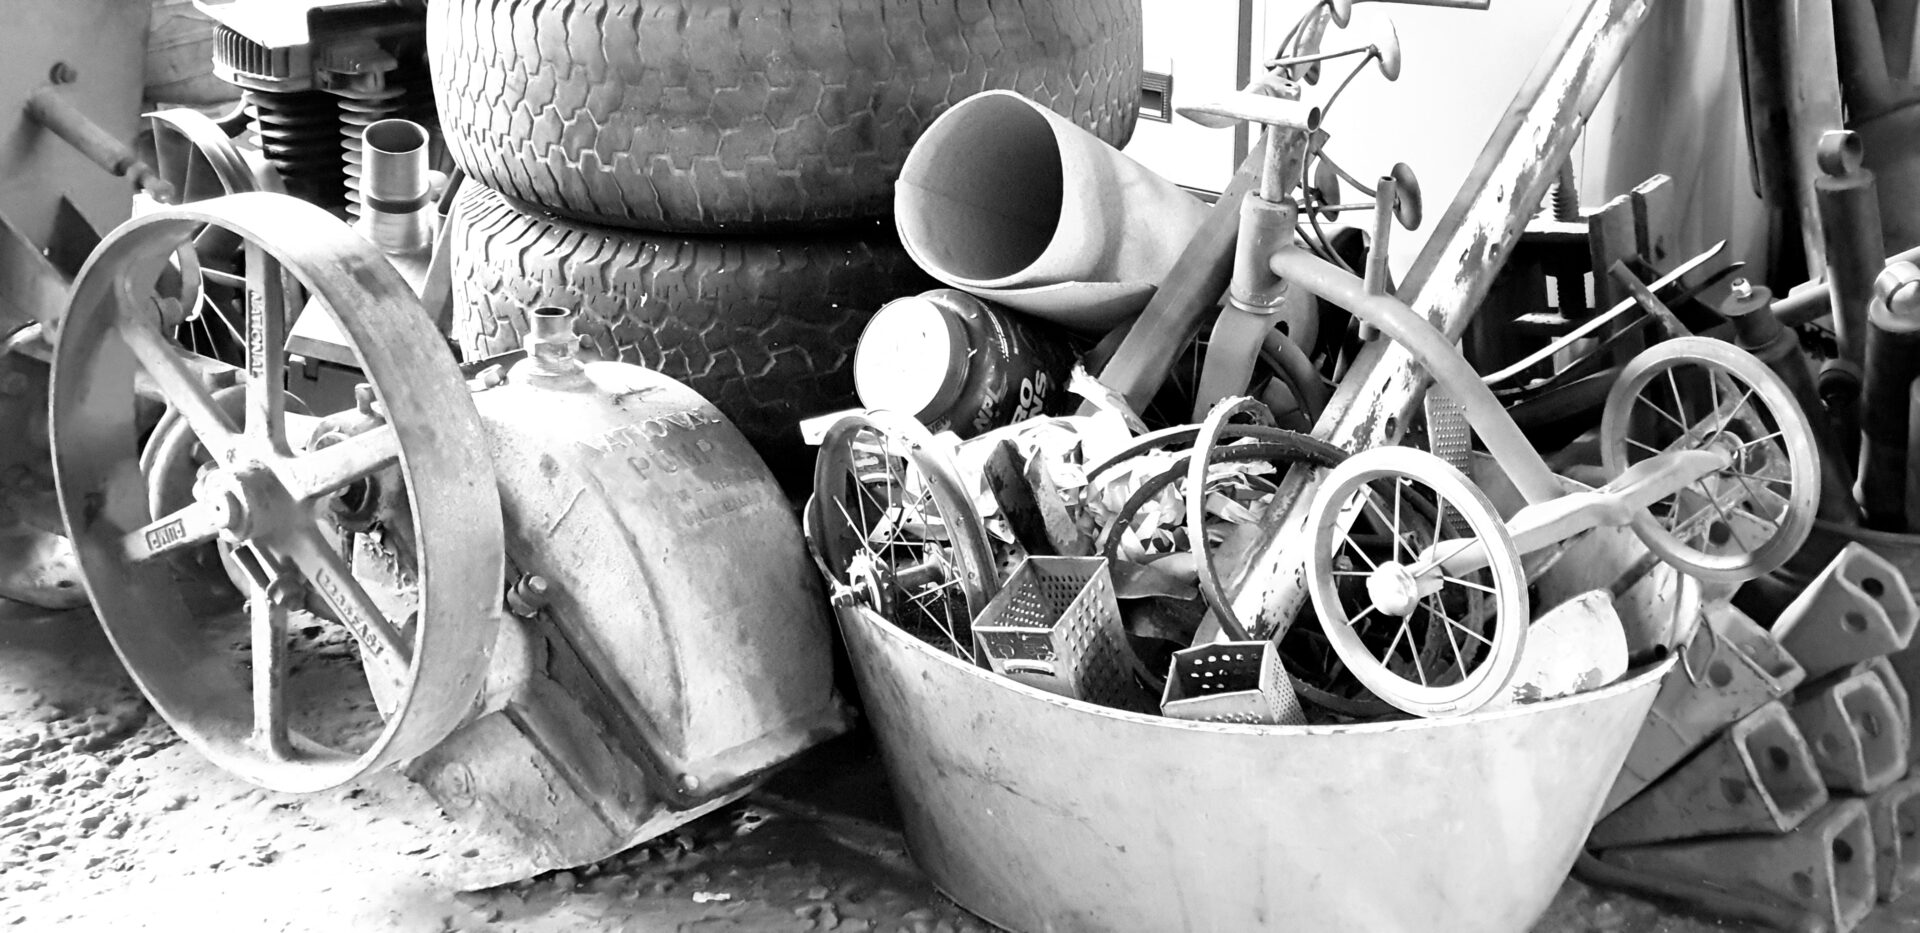 all types of junk for skip bins